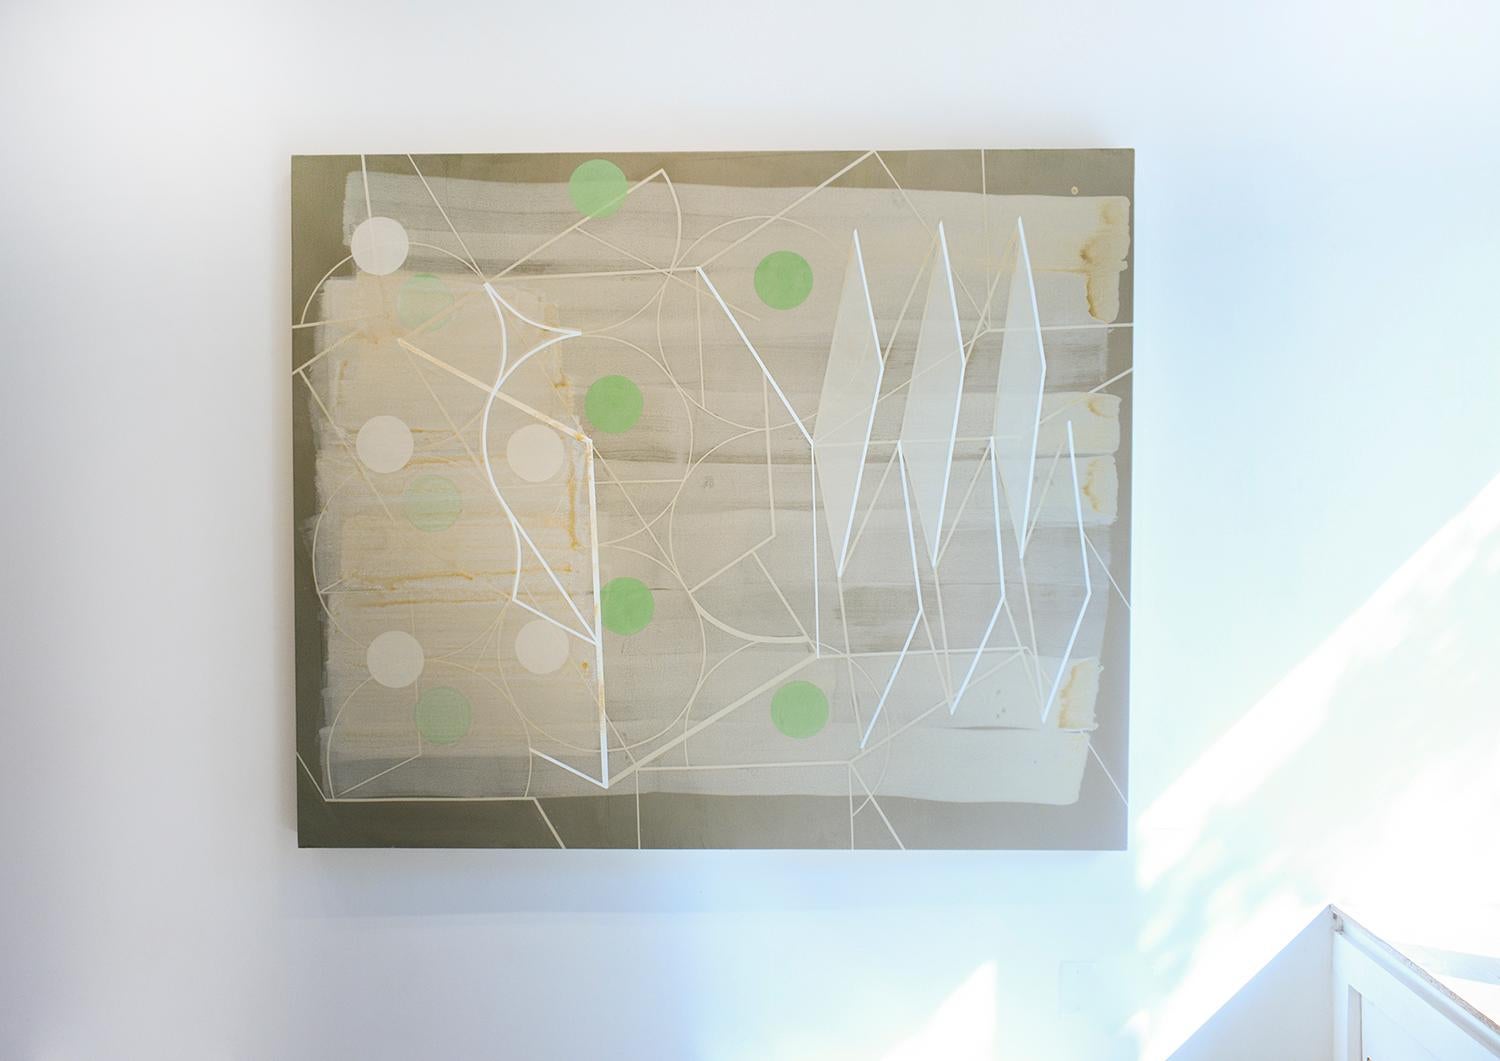 Geometric and gestural abstract painting on canvas in earth tones of beige, tan, light brown, with details of white and fern green 
